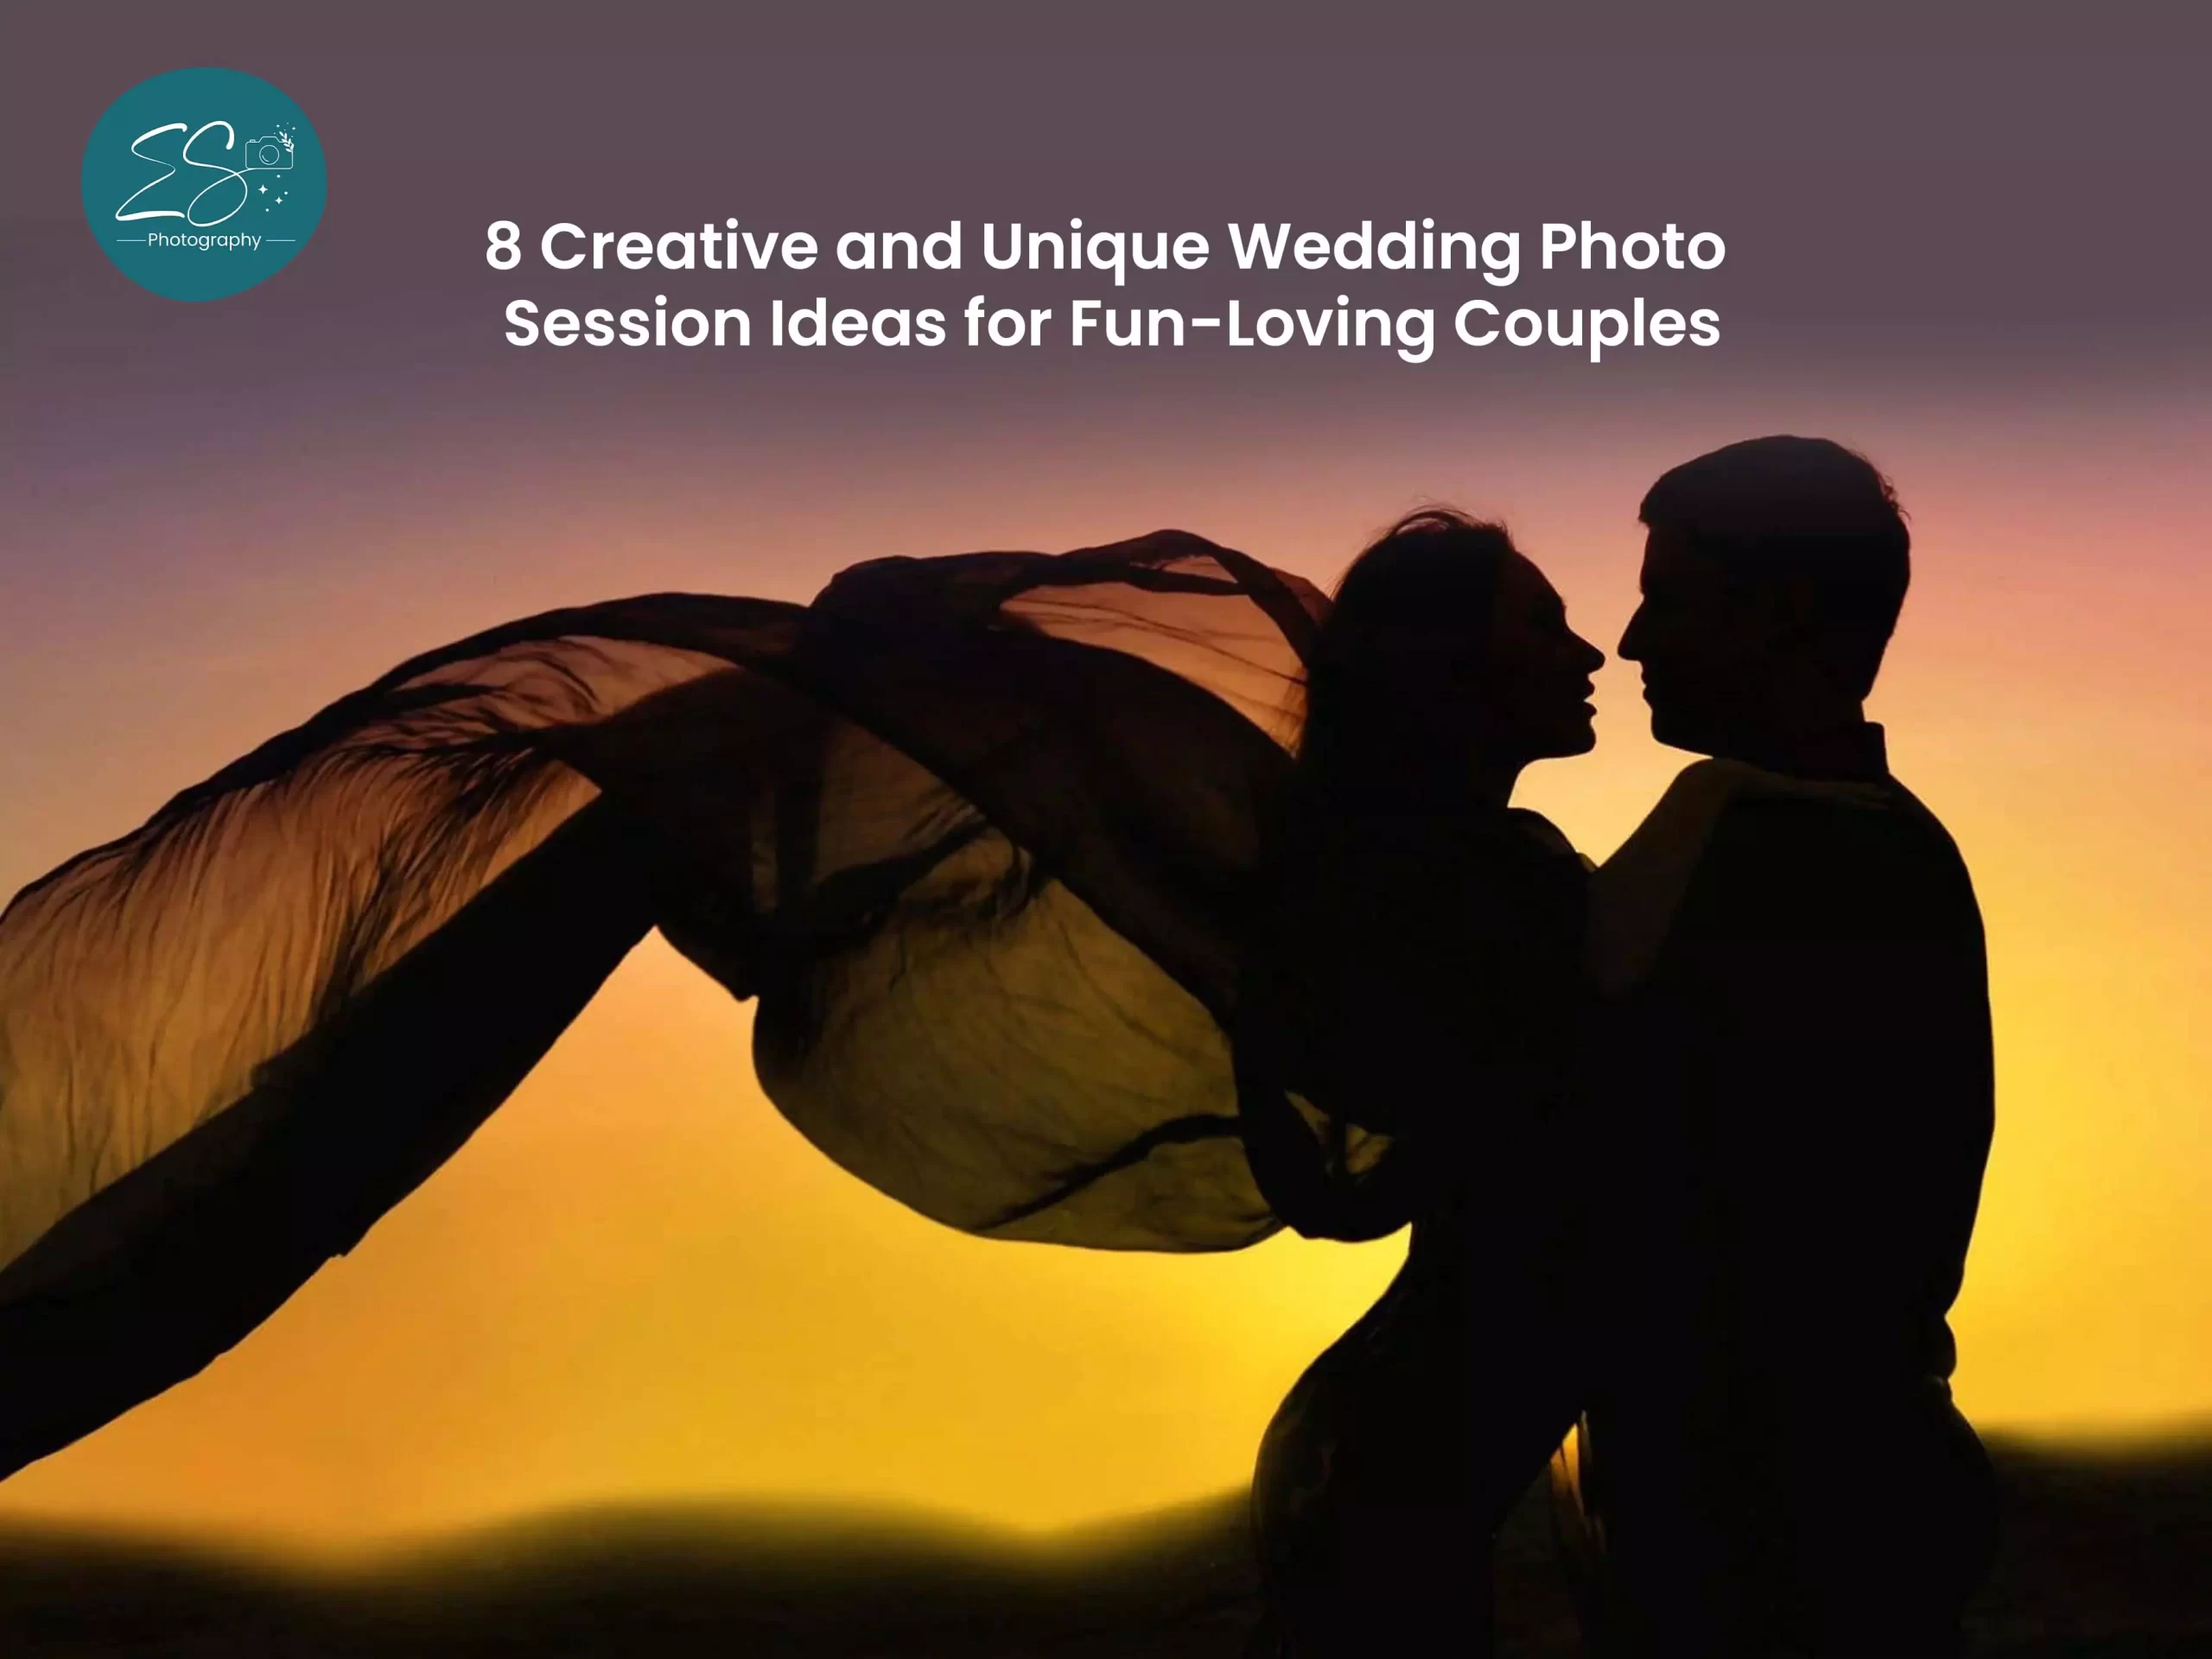 8 Creative and Unique Wedding Photo Session Ideas for Fun-Loving Couples